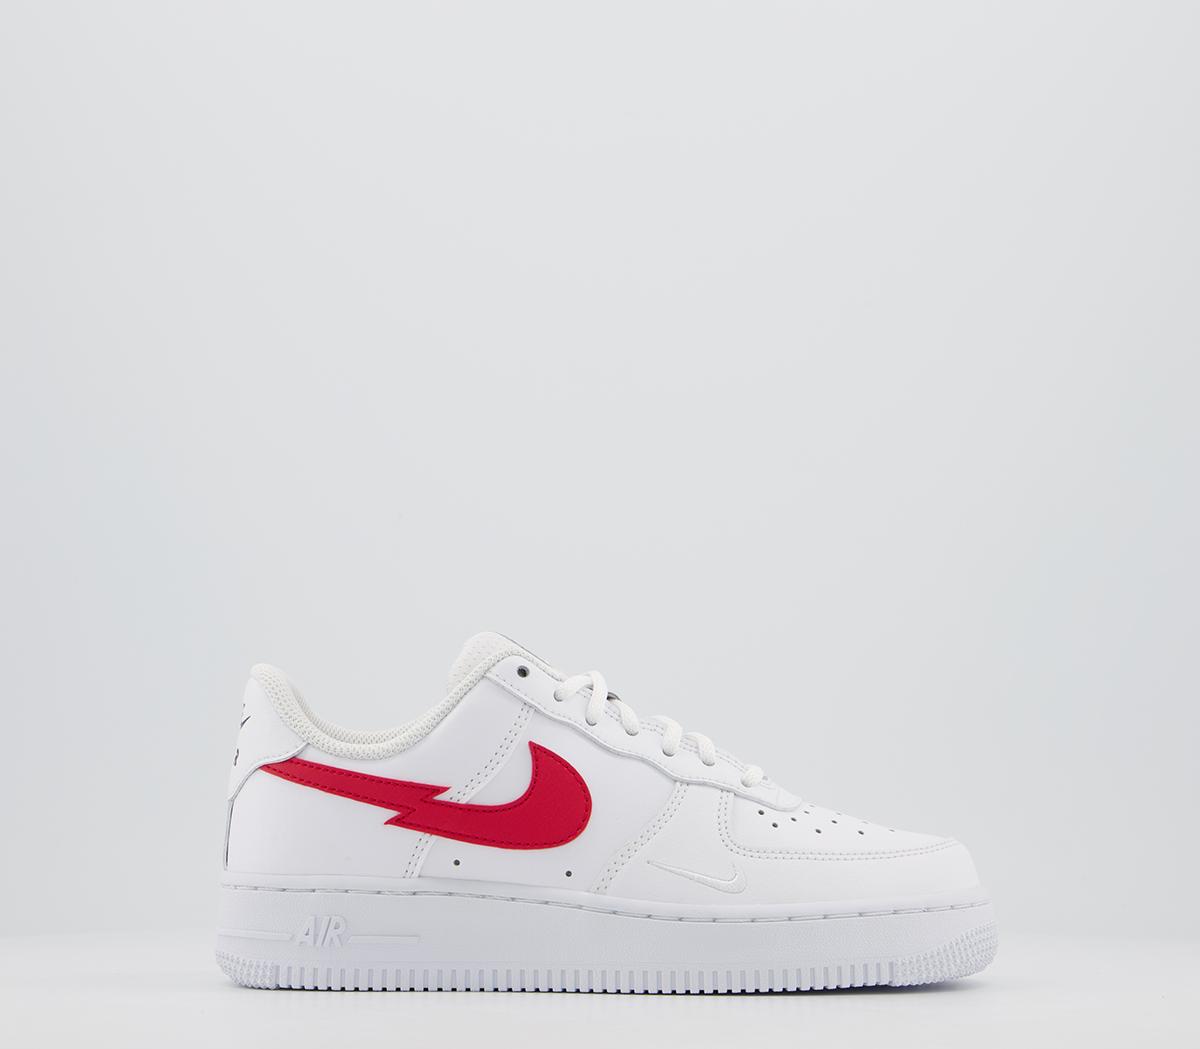 NikeNike Air Force 1 TrainersEuro Championship 20 Pack